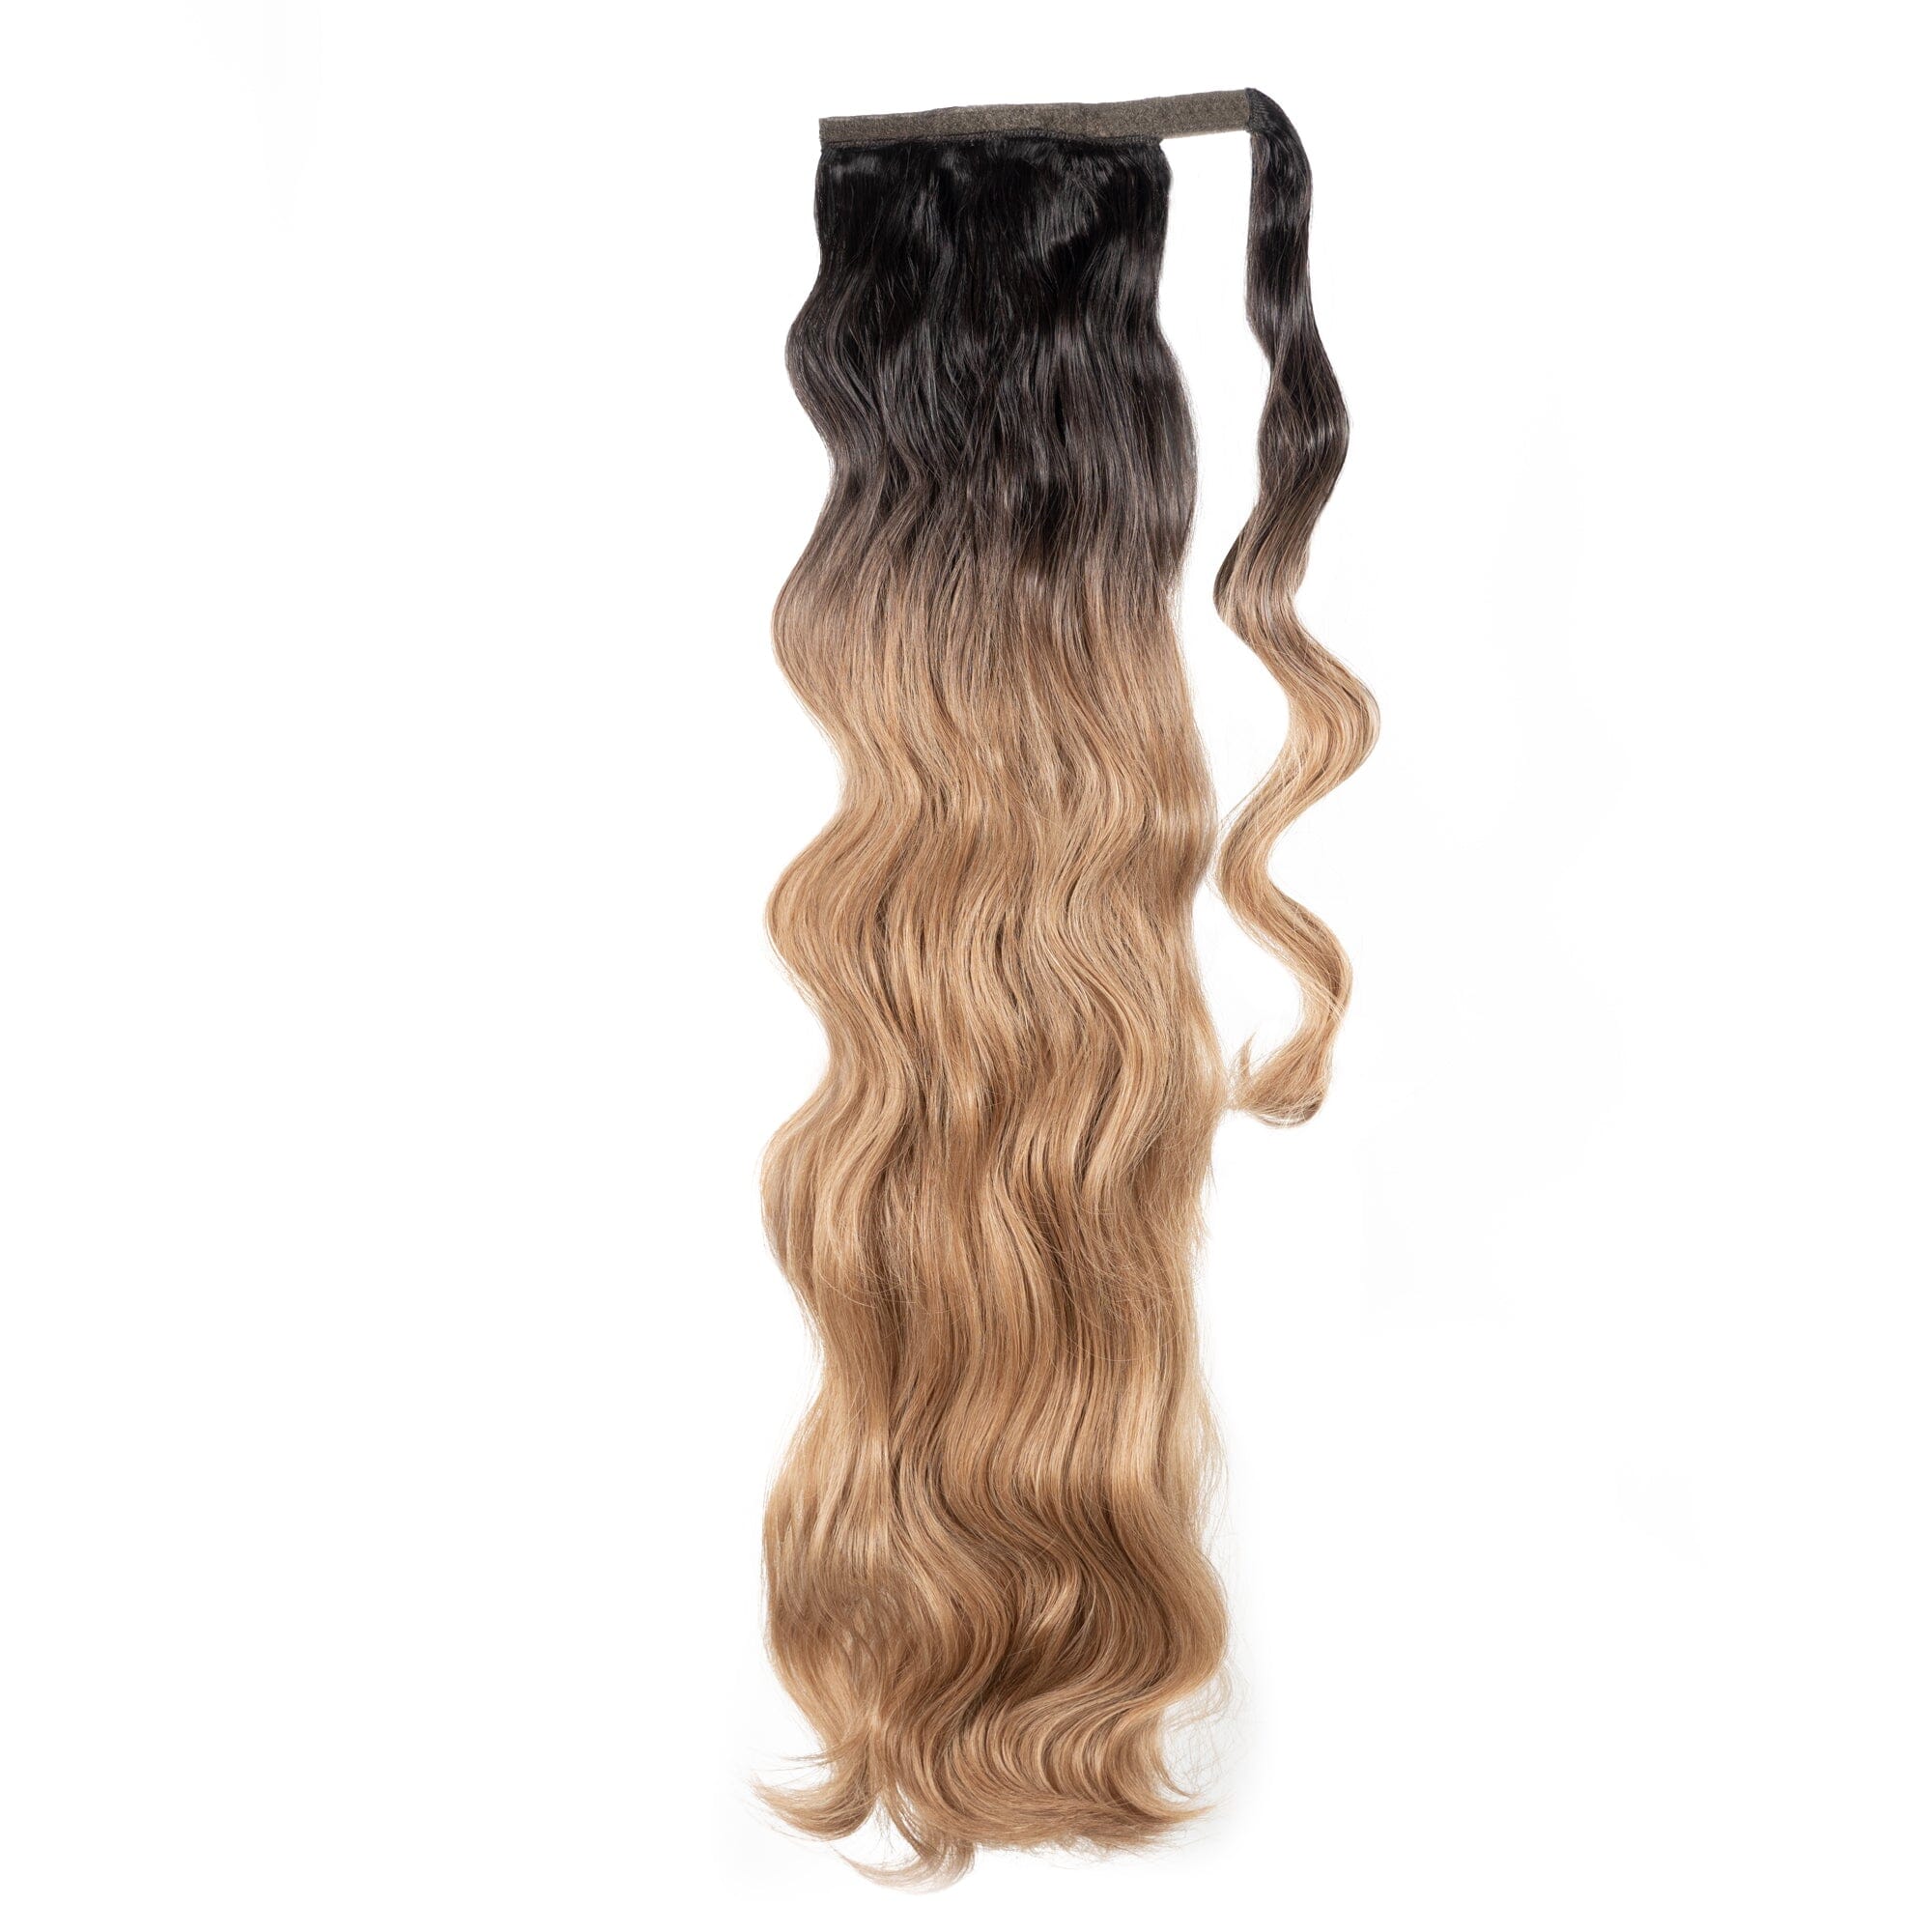 Long Clip-In Ponytails (22" - 30") Clip In Ponytail Easilocks 30"Body Wave Clip-In Ponytail Medium Brown Ombre 